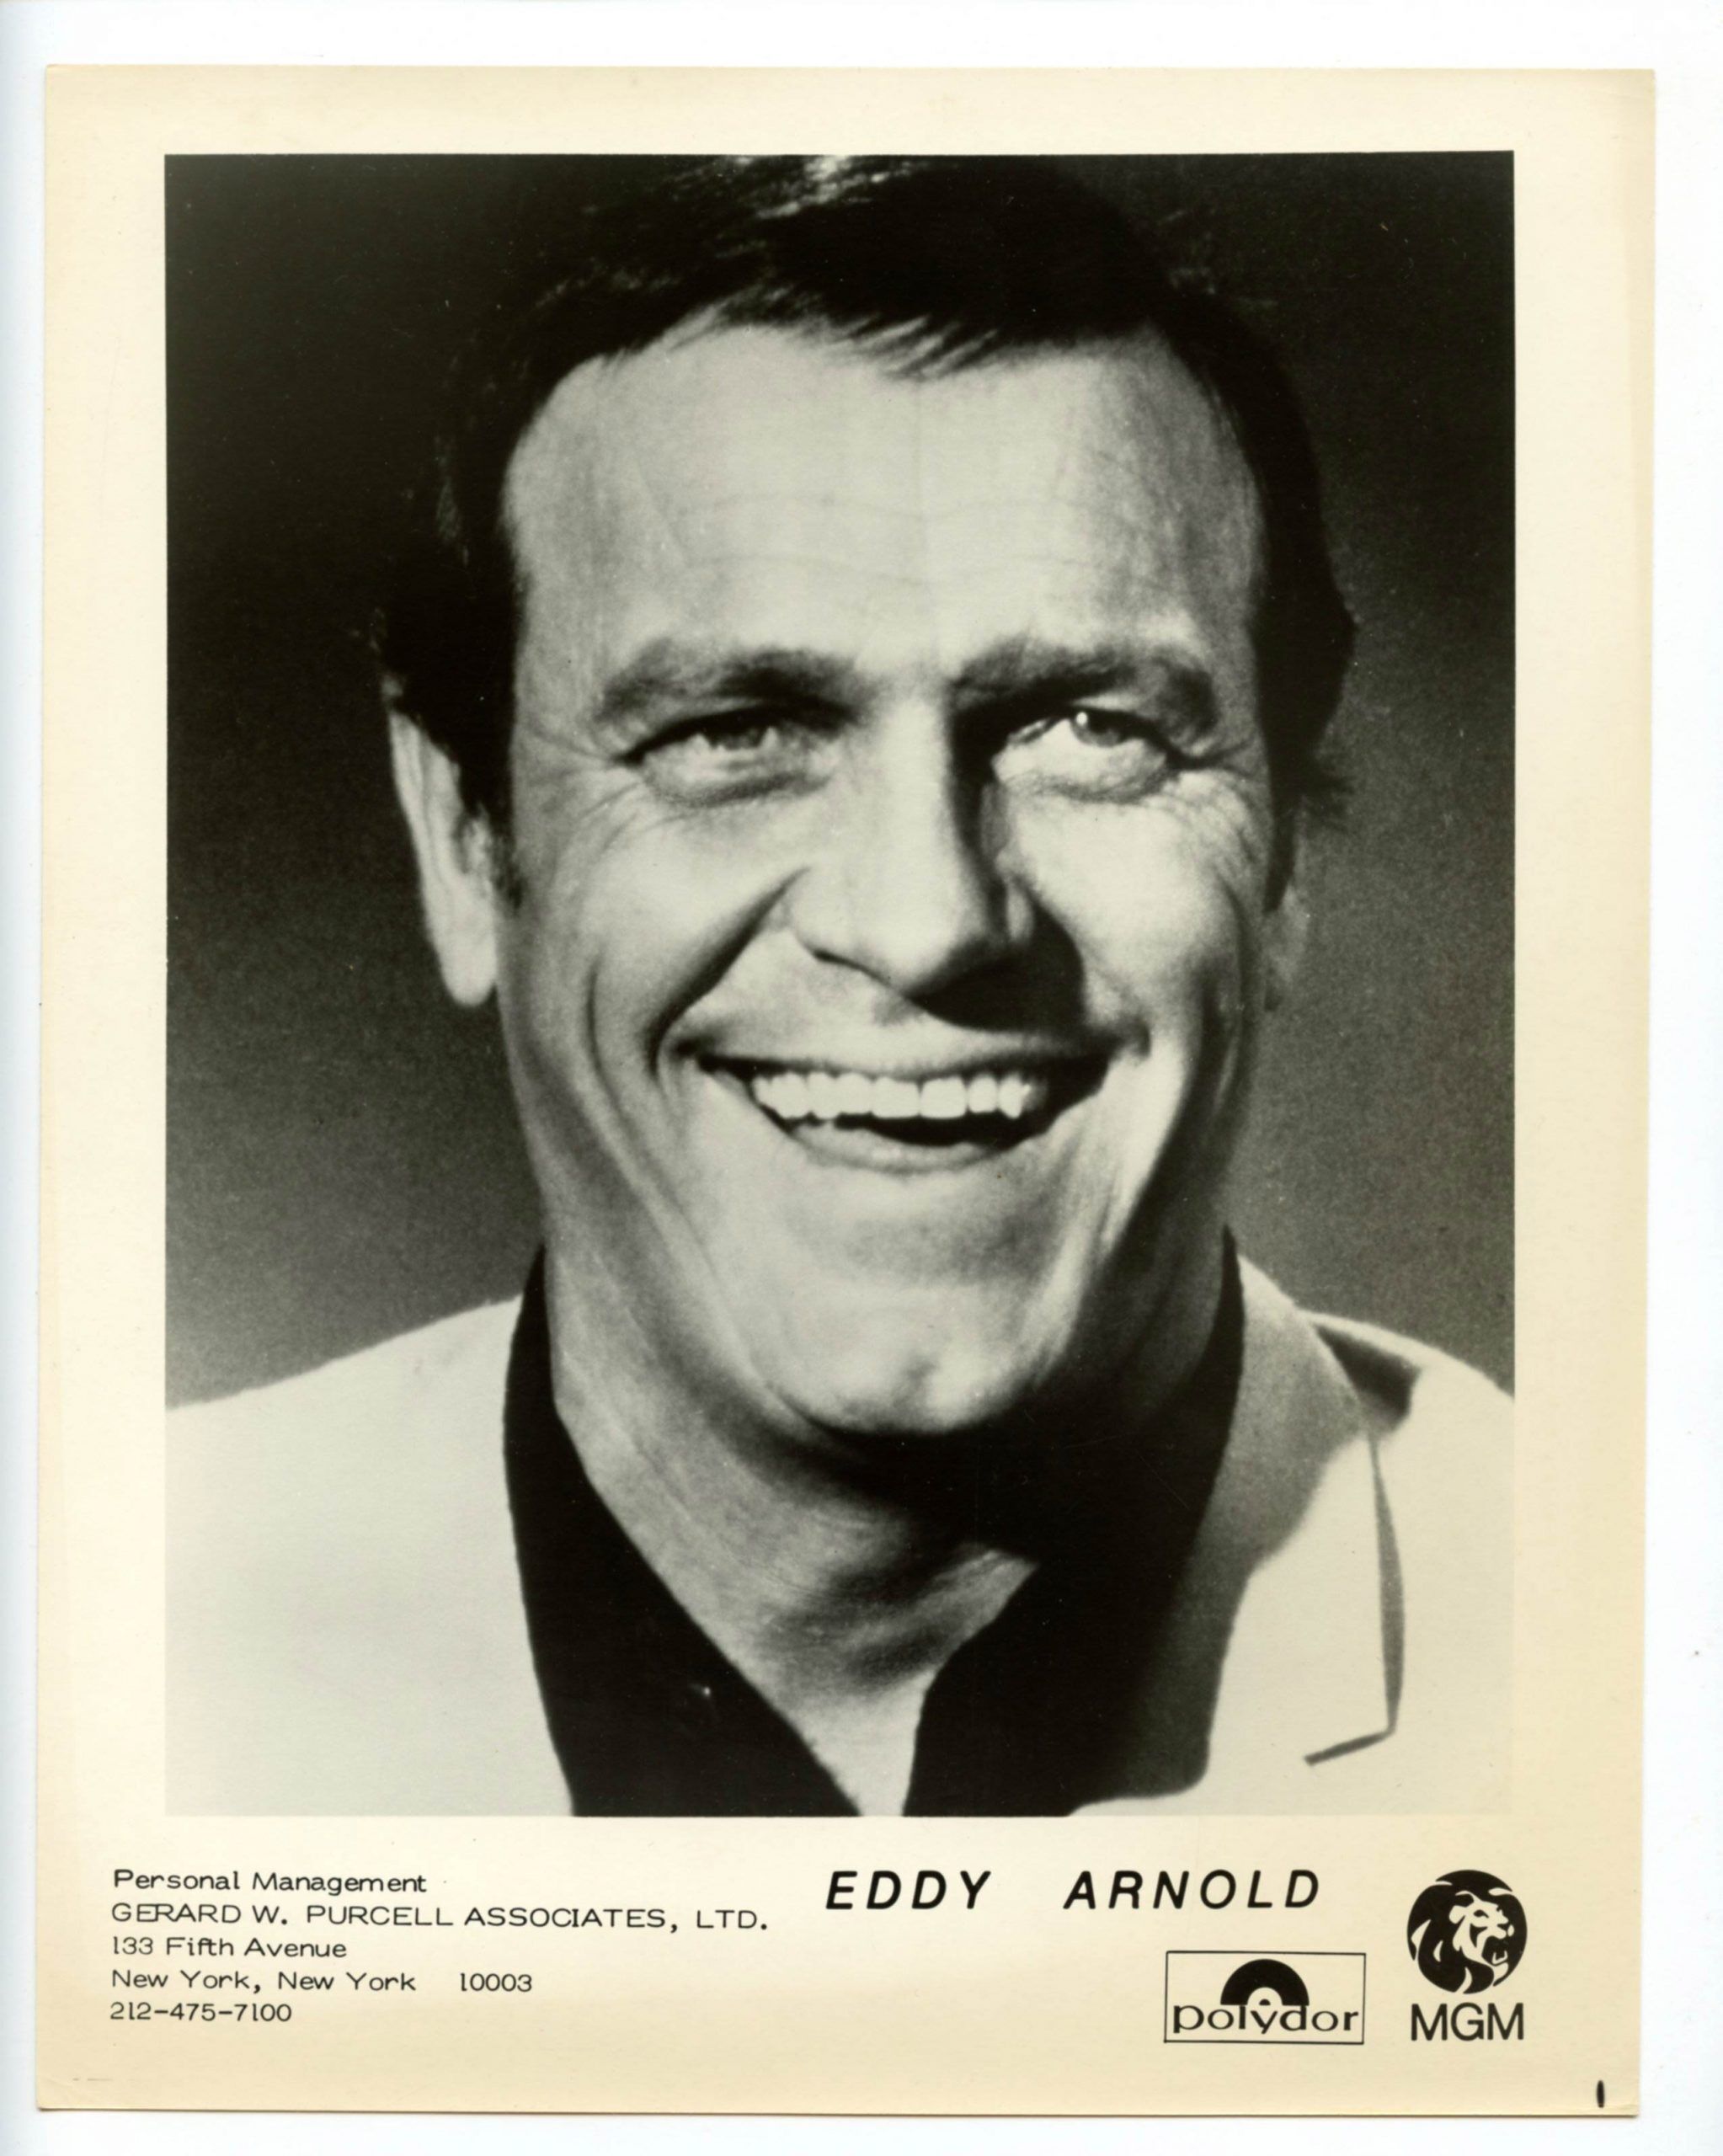 Eddy Arnold Photo 1970s MGM Records